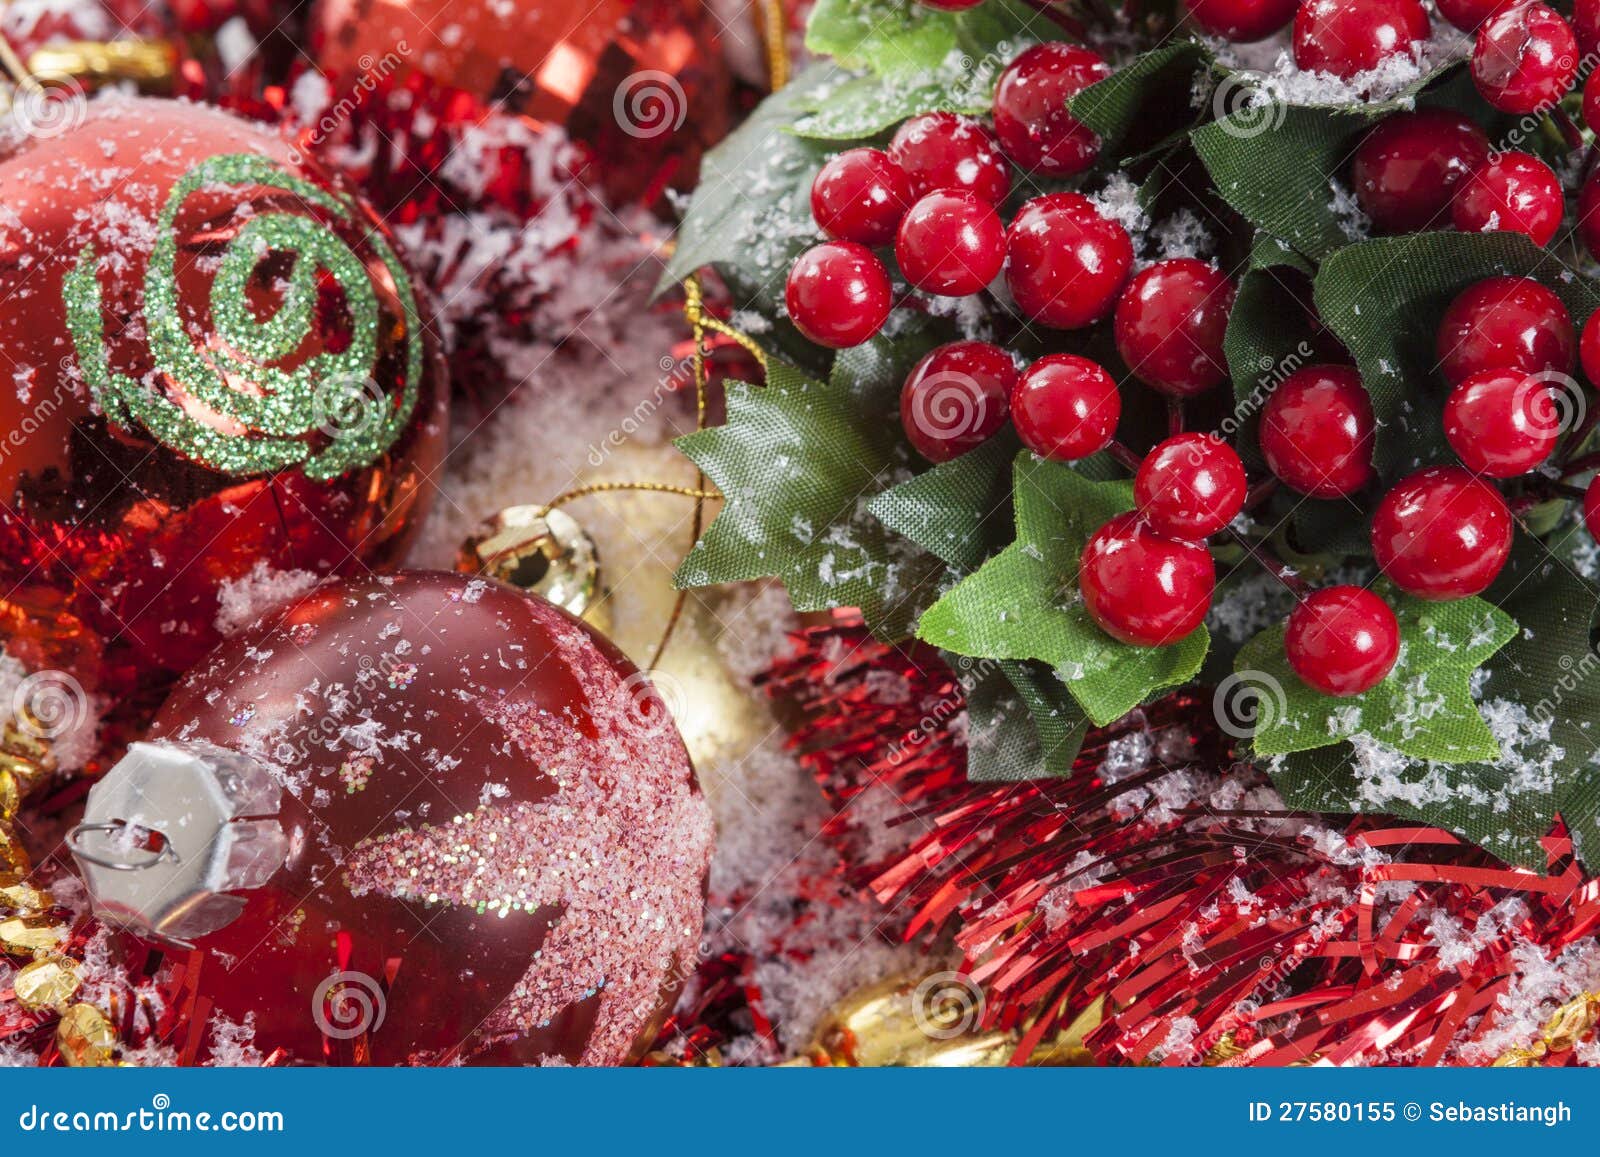 Holly Berries Christmas Decoration Stock Image - Image of holidays ...